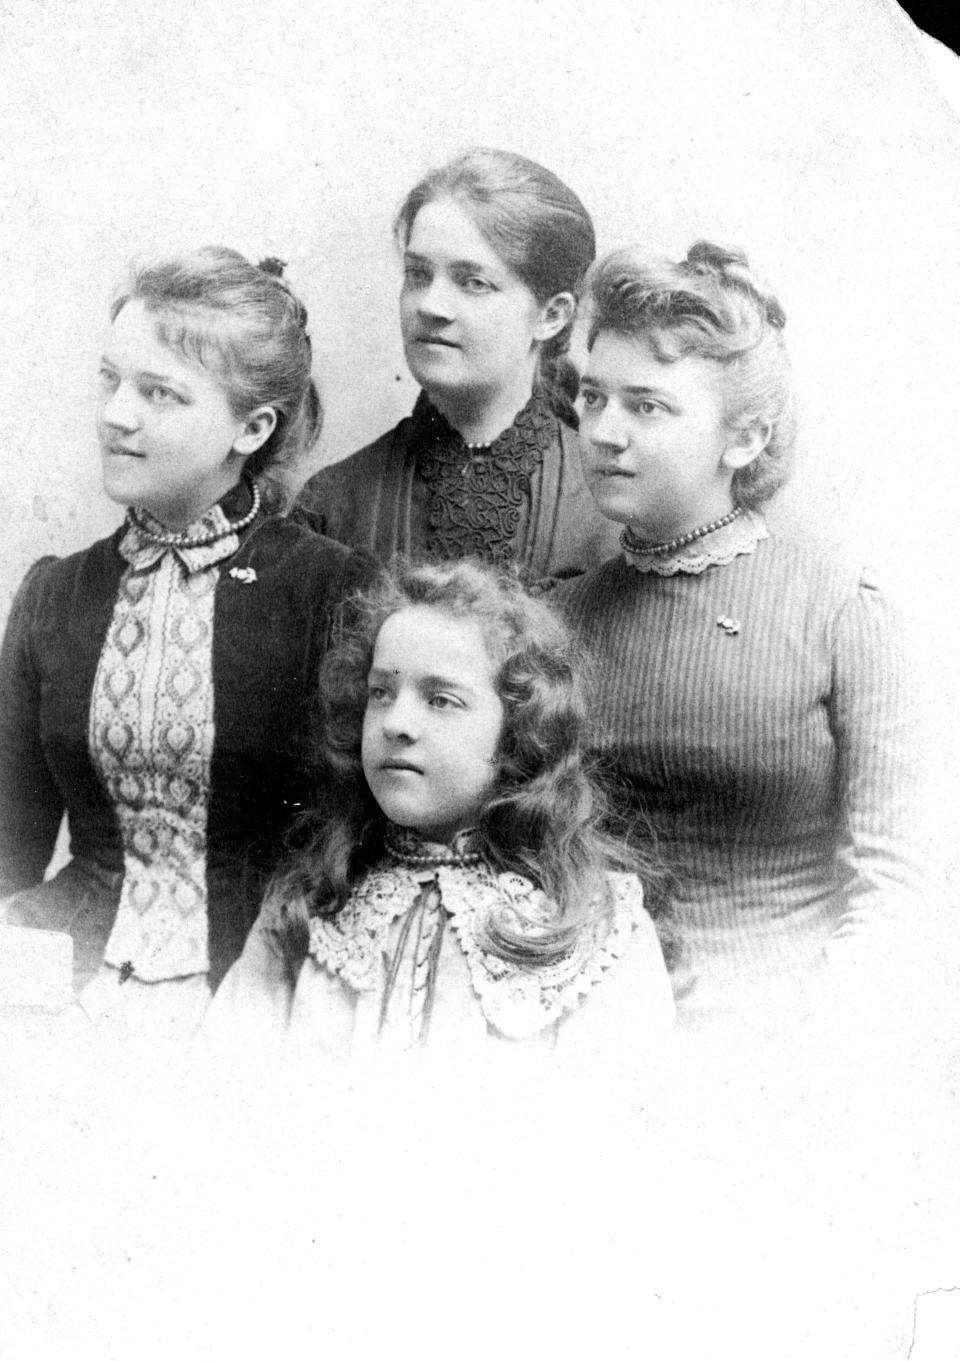 Augusta (top left, then clockwise), Anna, Helen and Julia Larrabee, daughters of Anna and William Larrabee, in about 1882.